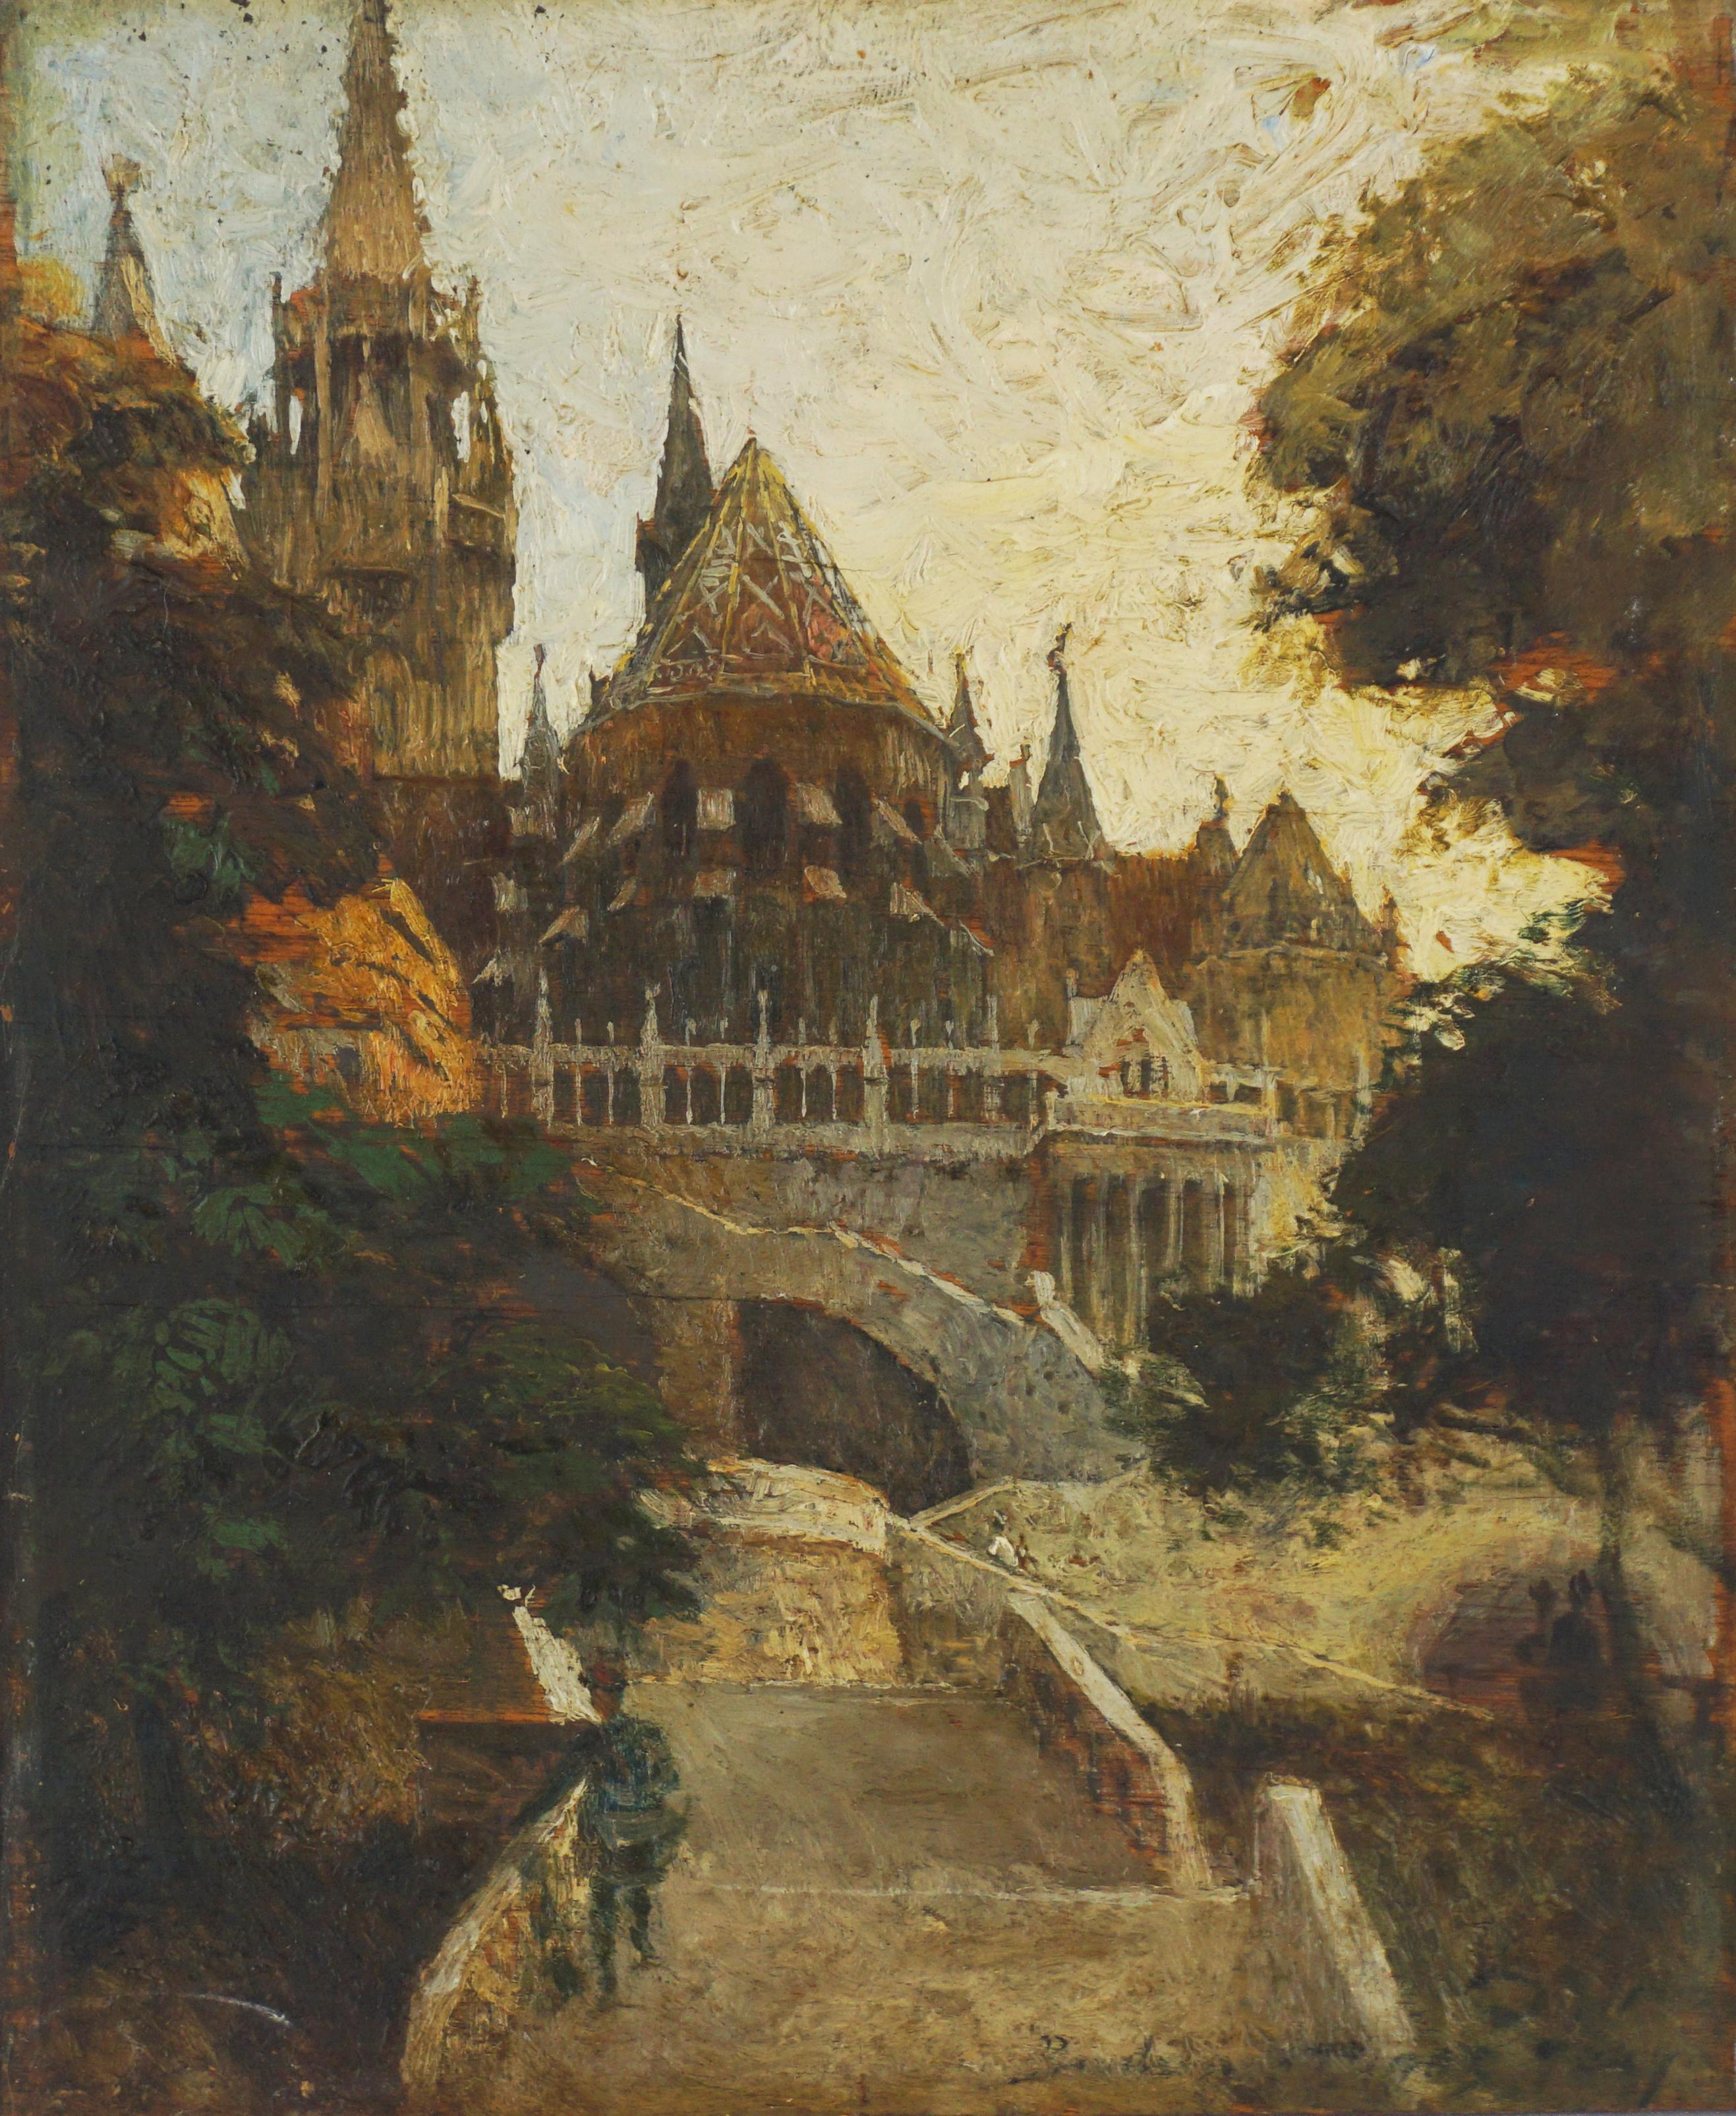 1905 Small Hungarian Landscape of Park and Church - Painting by Arpad Basch